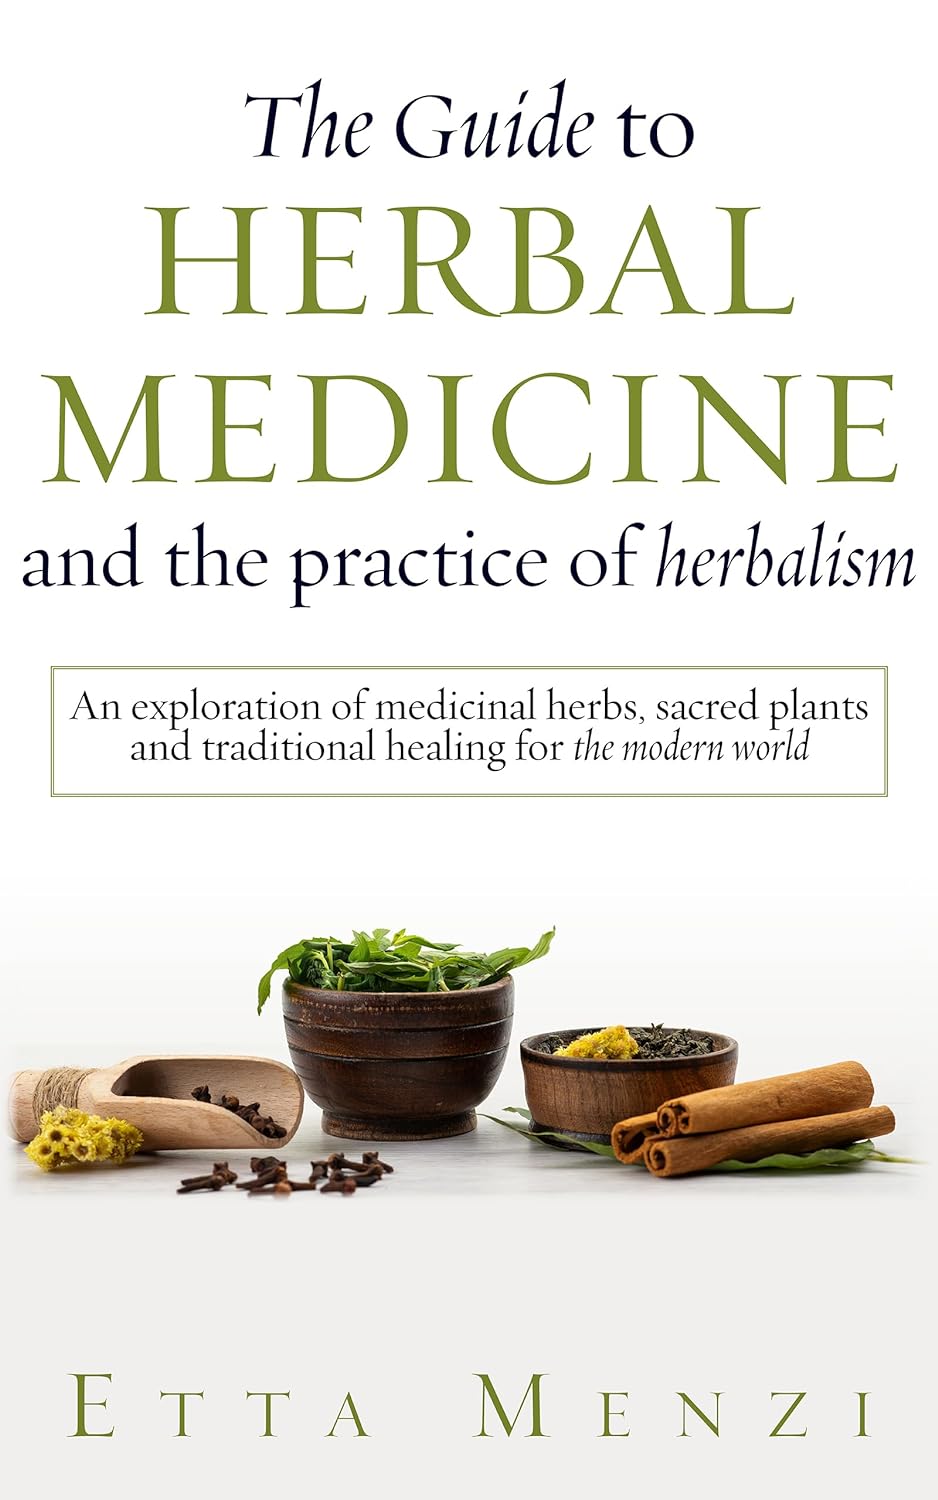 The Guide to Herbal Medicine and the Practice of Herbalism